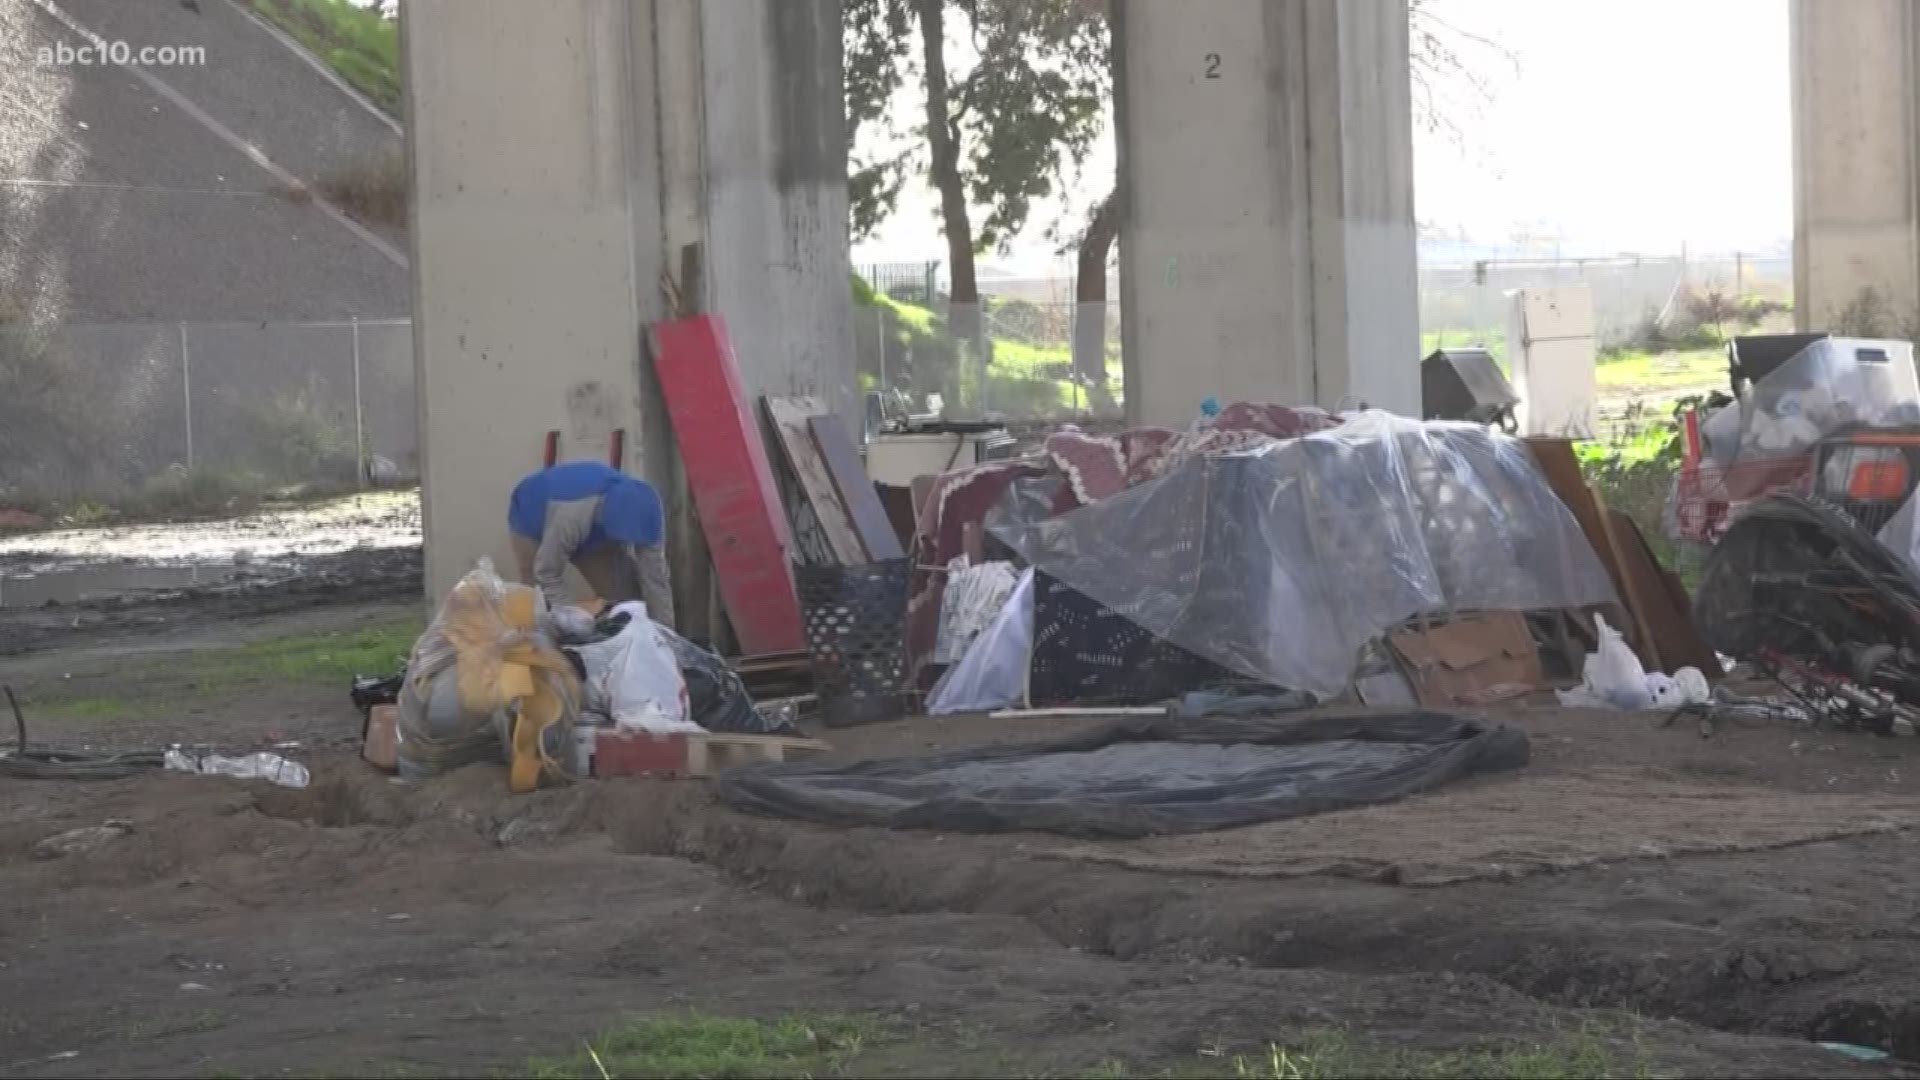 The governor's homeless task force proposes making it legal and binding that cities, counties provide shelter and resources for the homeless.